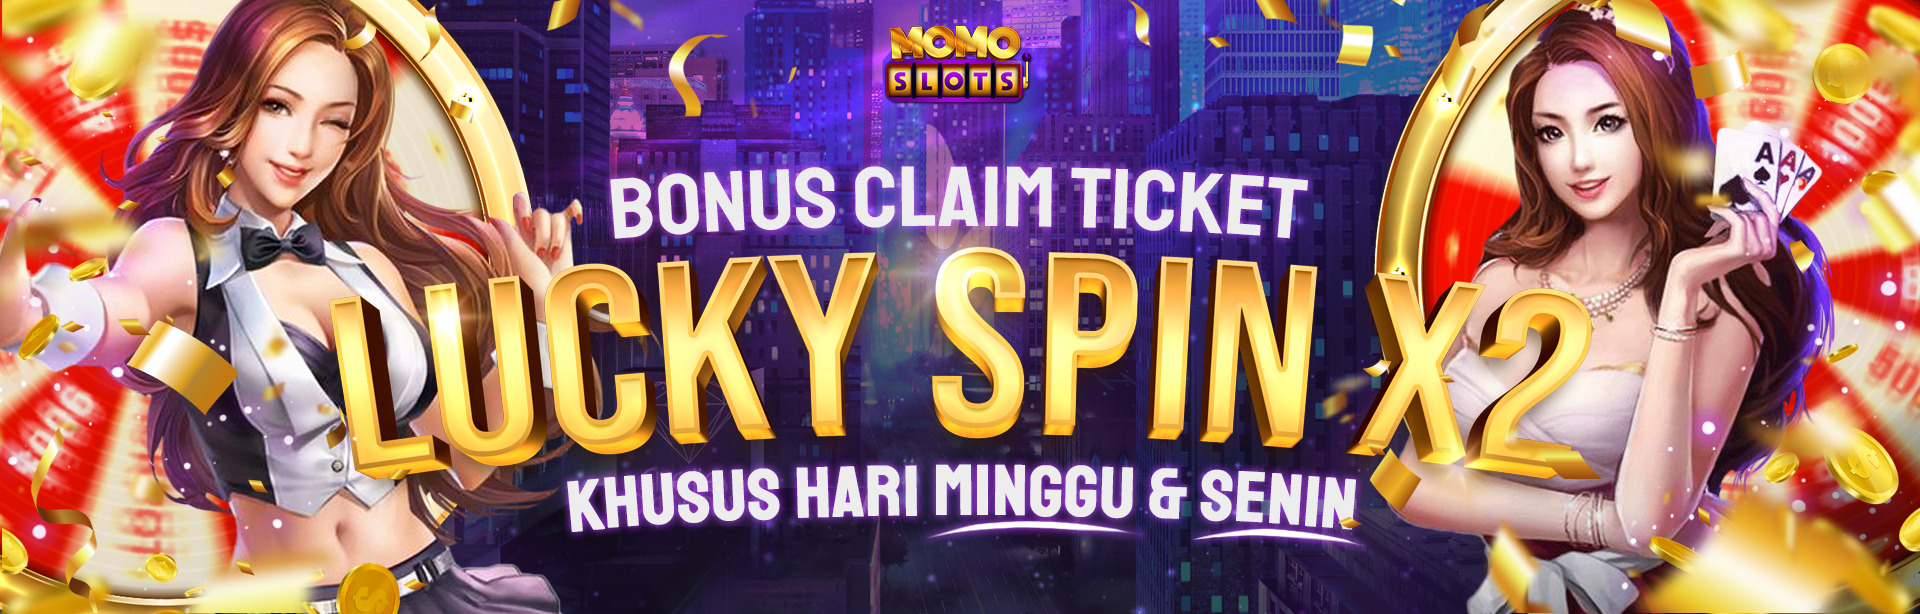 CLAIM TICKET LUCKY SPIN X2